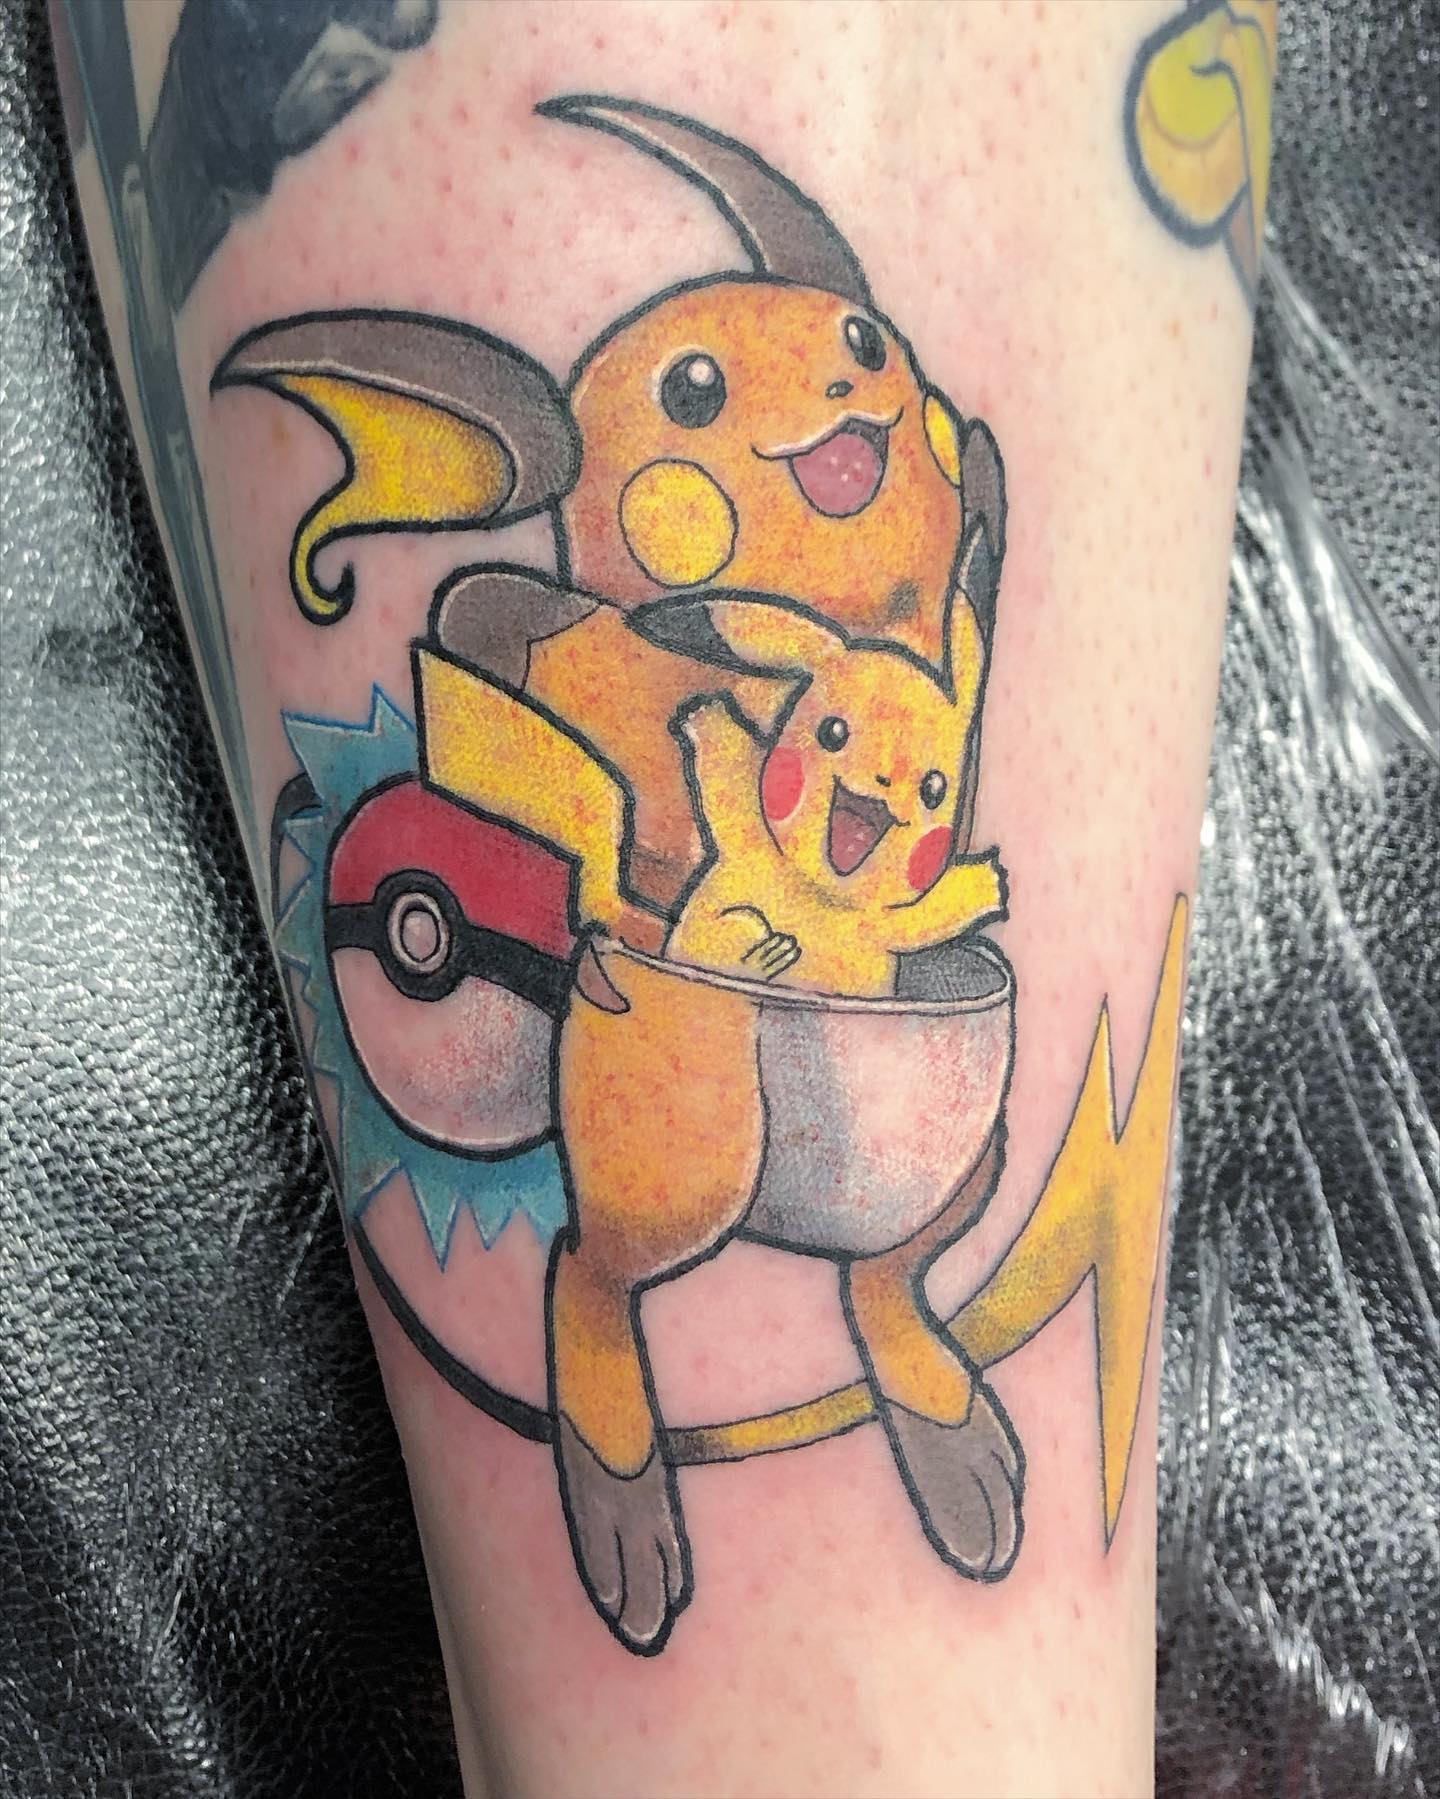 Pikachu Raichu shin banger from a wee bit ago, never posted a still of these lovely guys. Thank you Kat, hope it’s settled in nice and easy!

                   